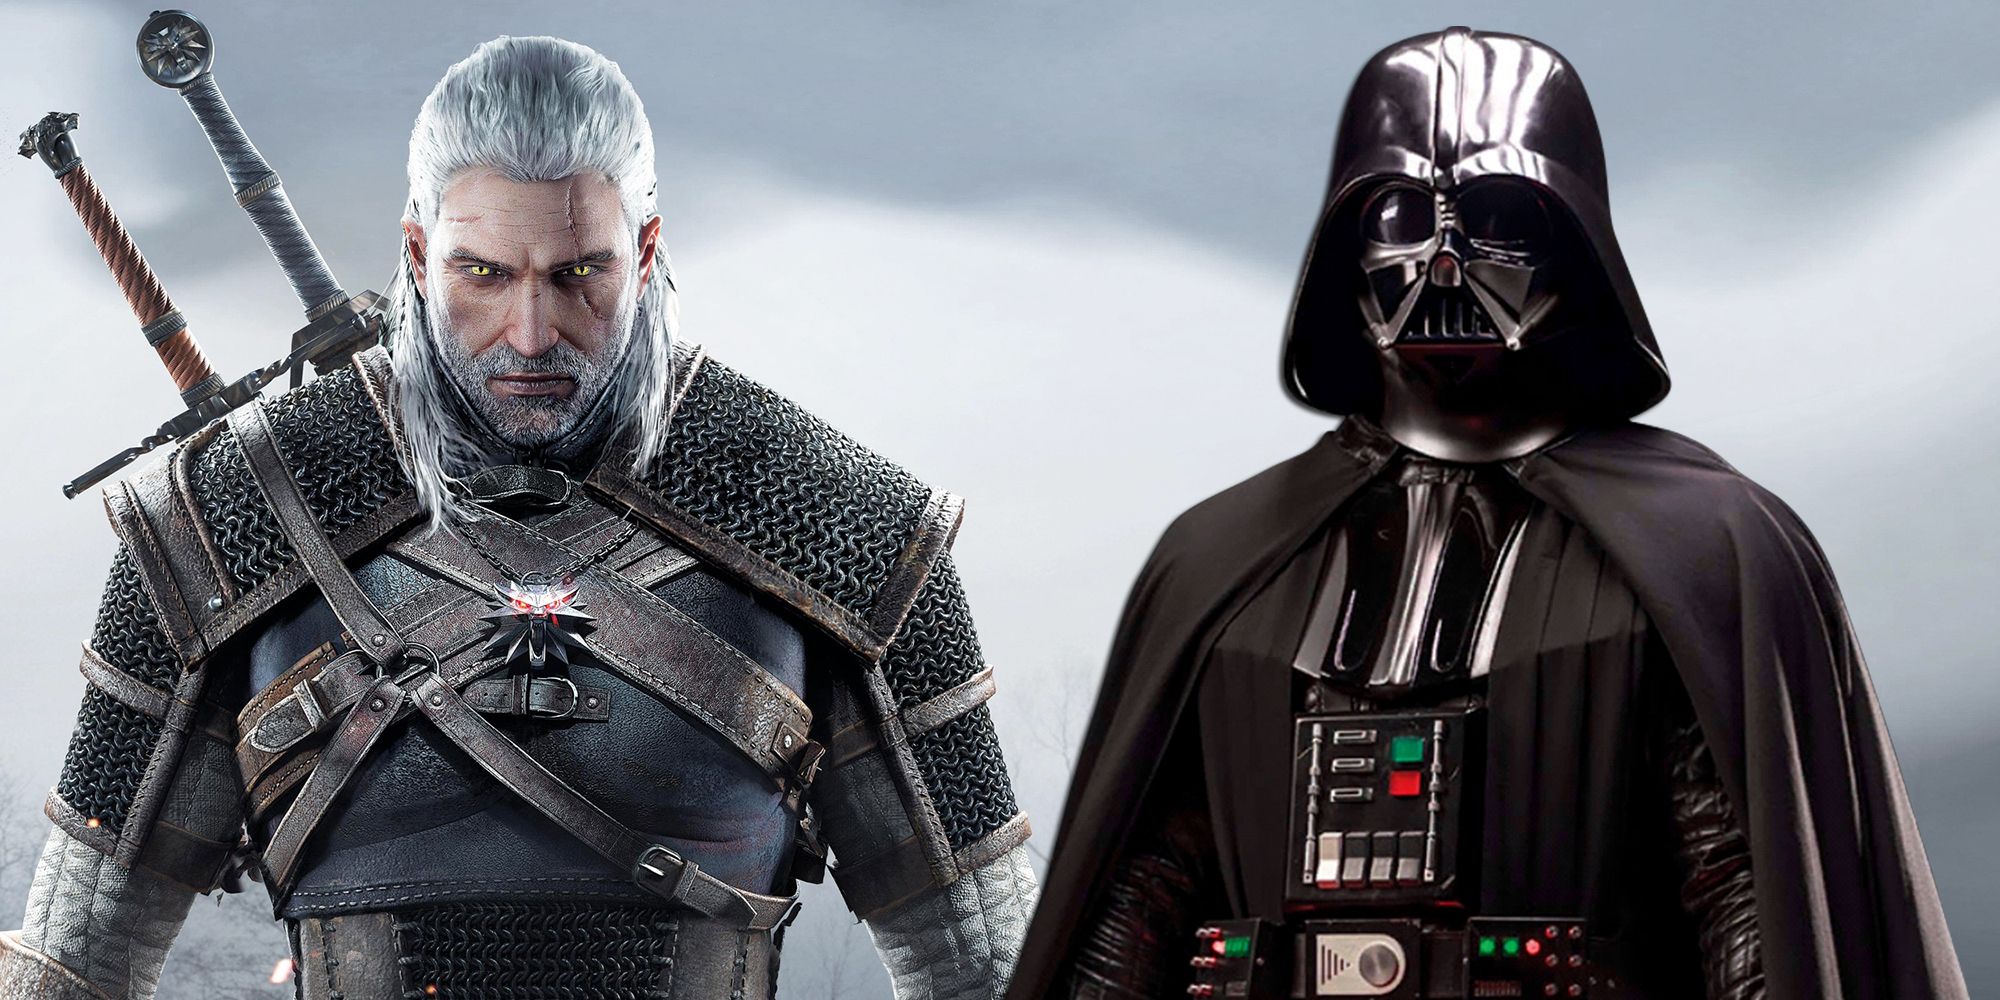 The Witcher 3's Geralt with Darth Vader